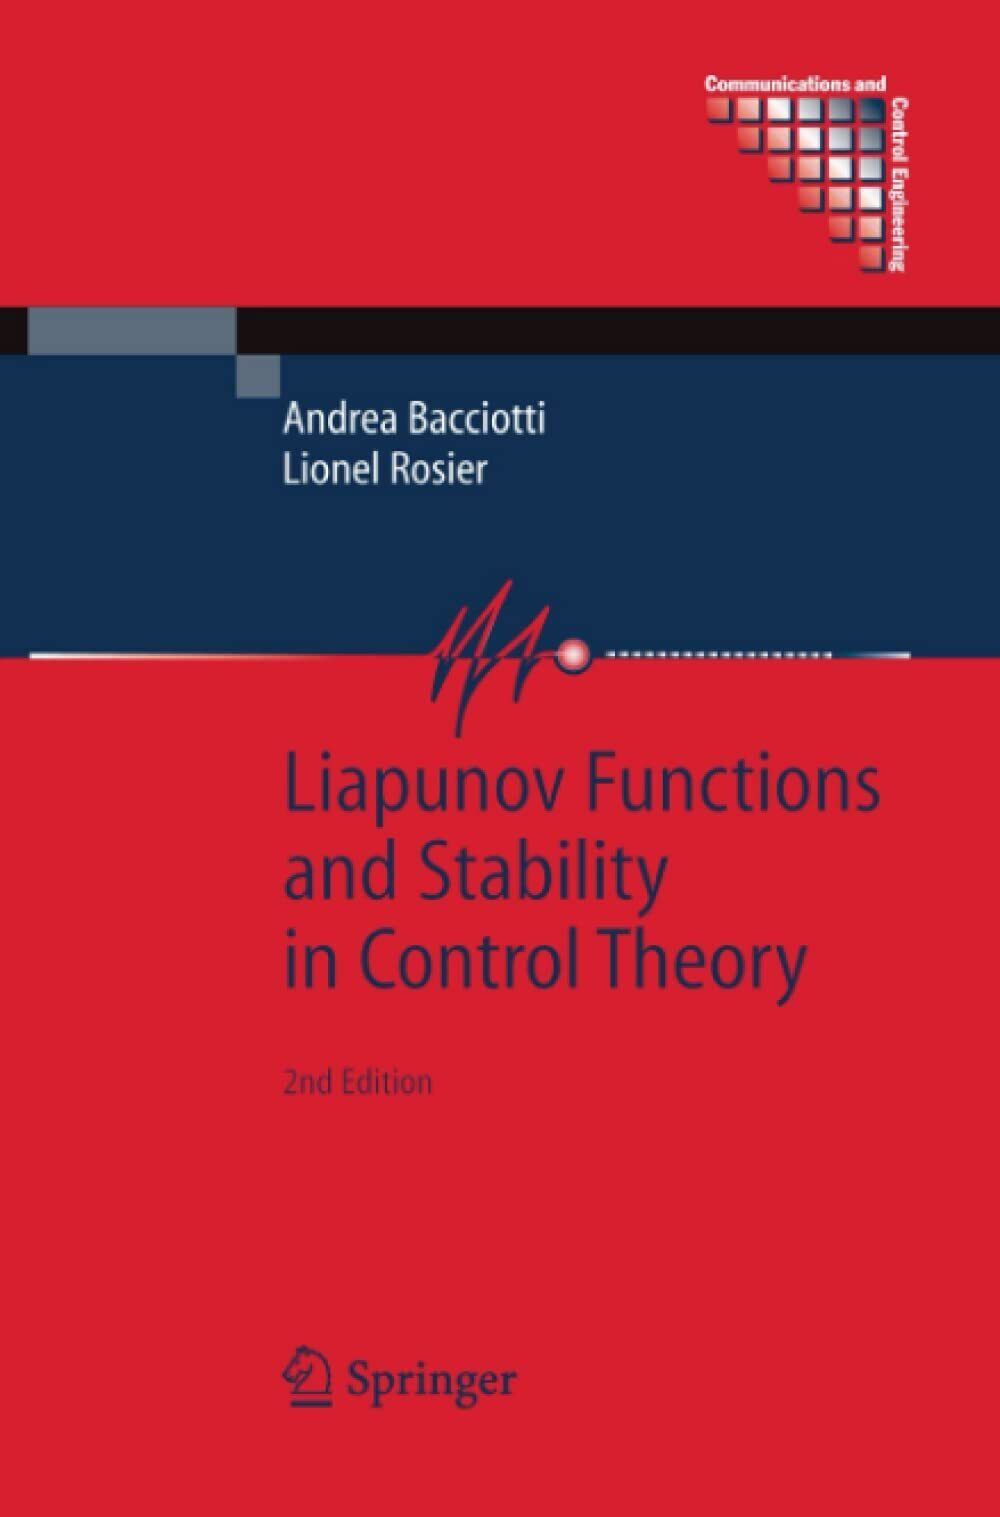 Liapunov Functions and Stability in Control Theory - Springer, 2010 libro usato